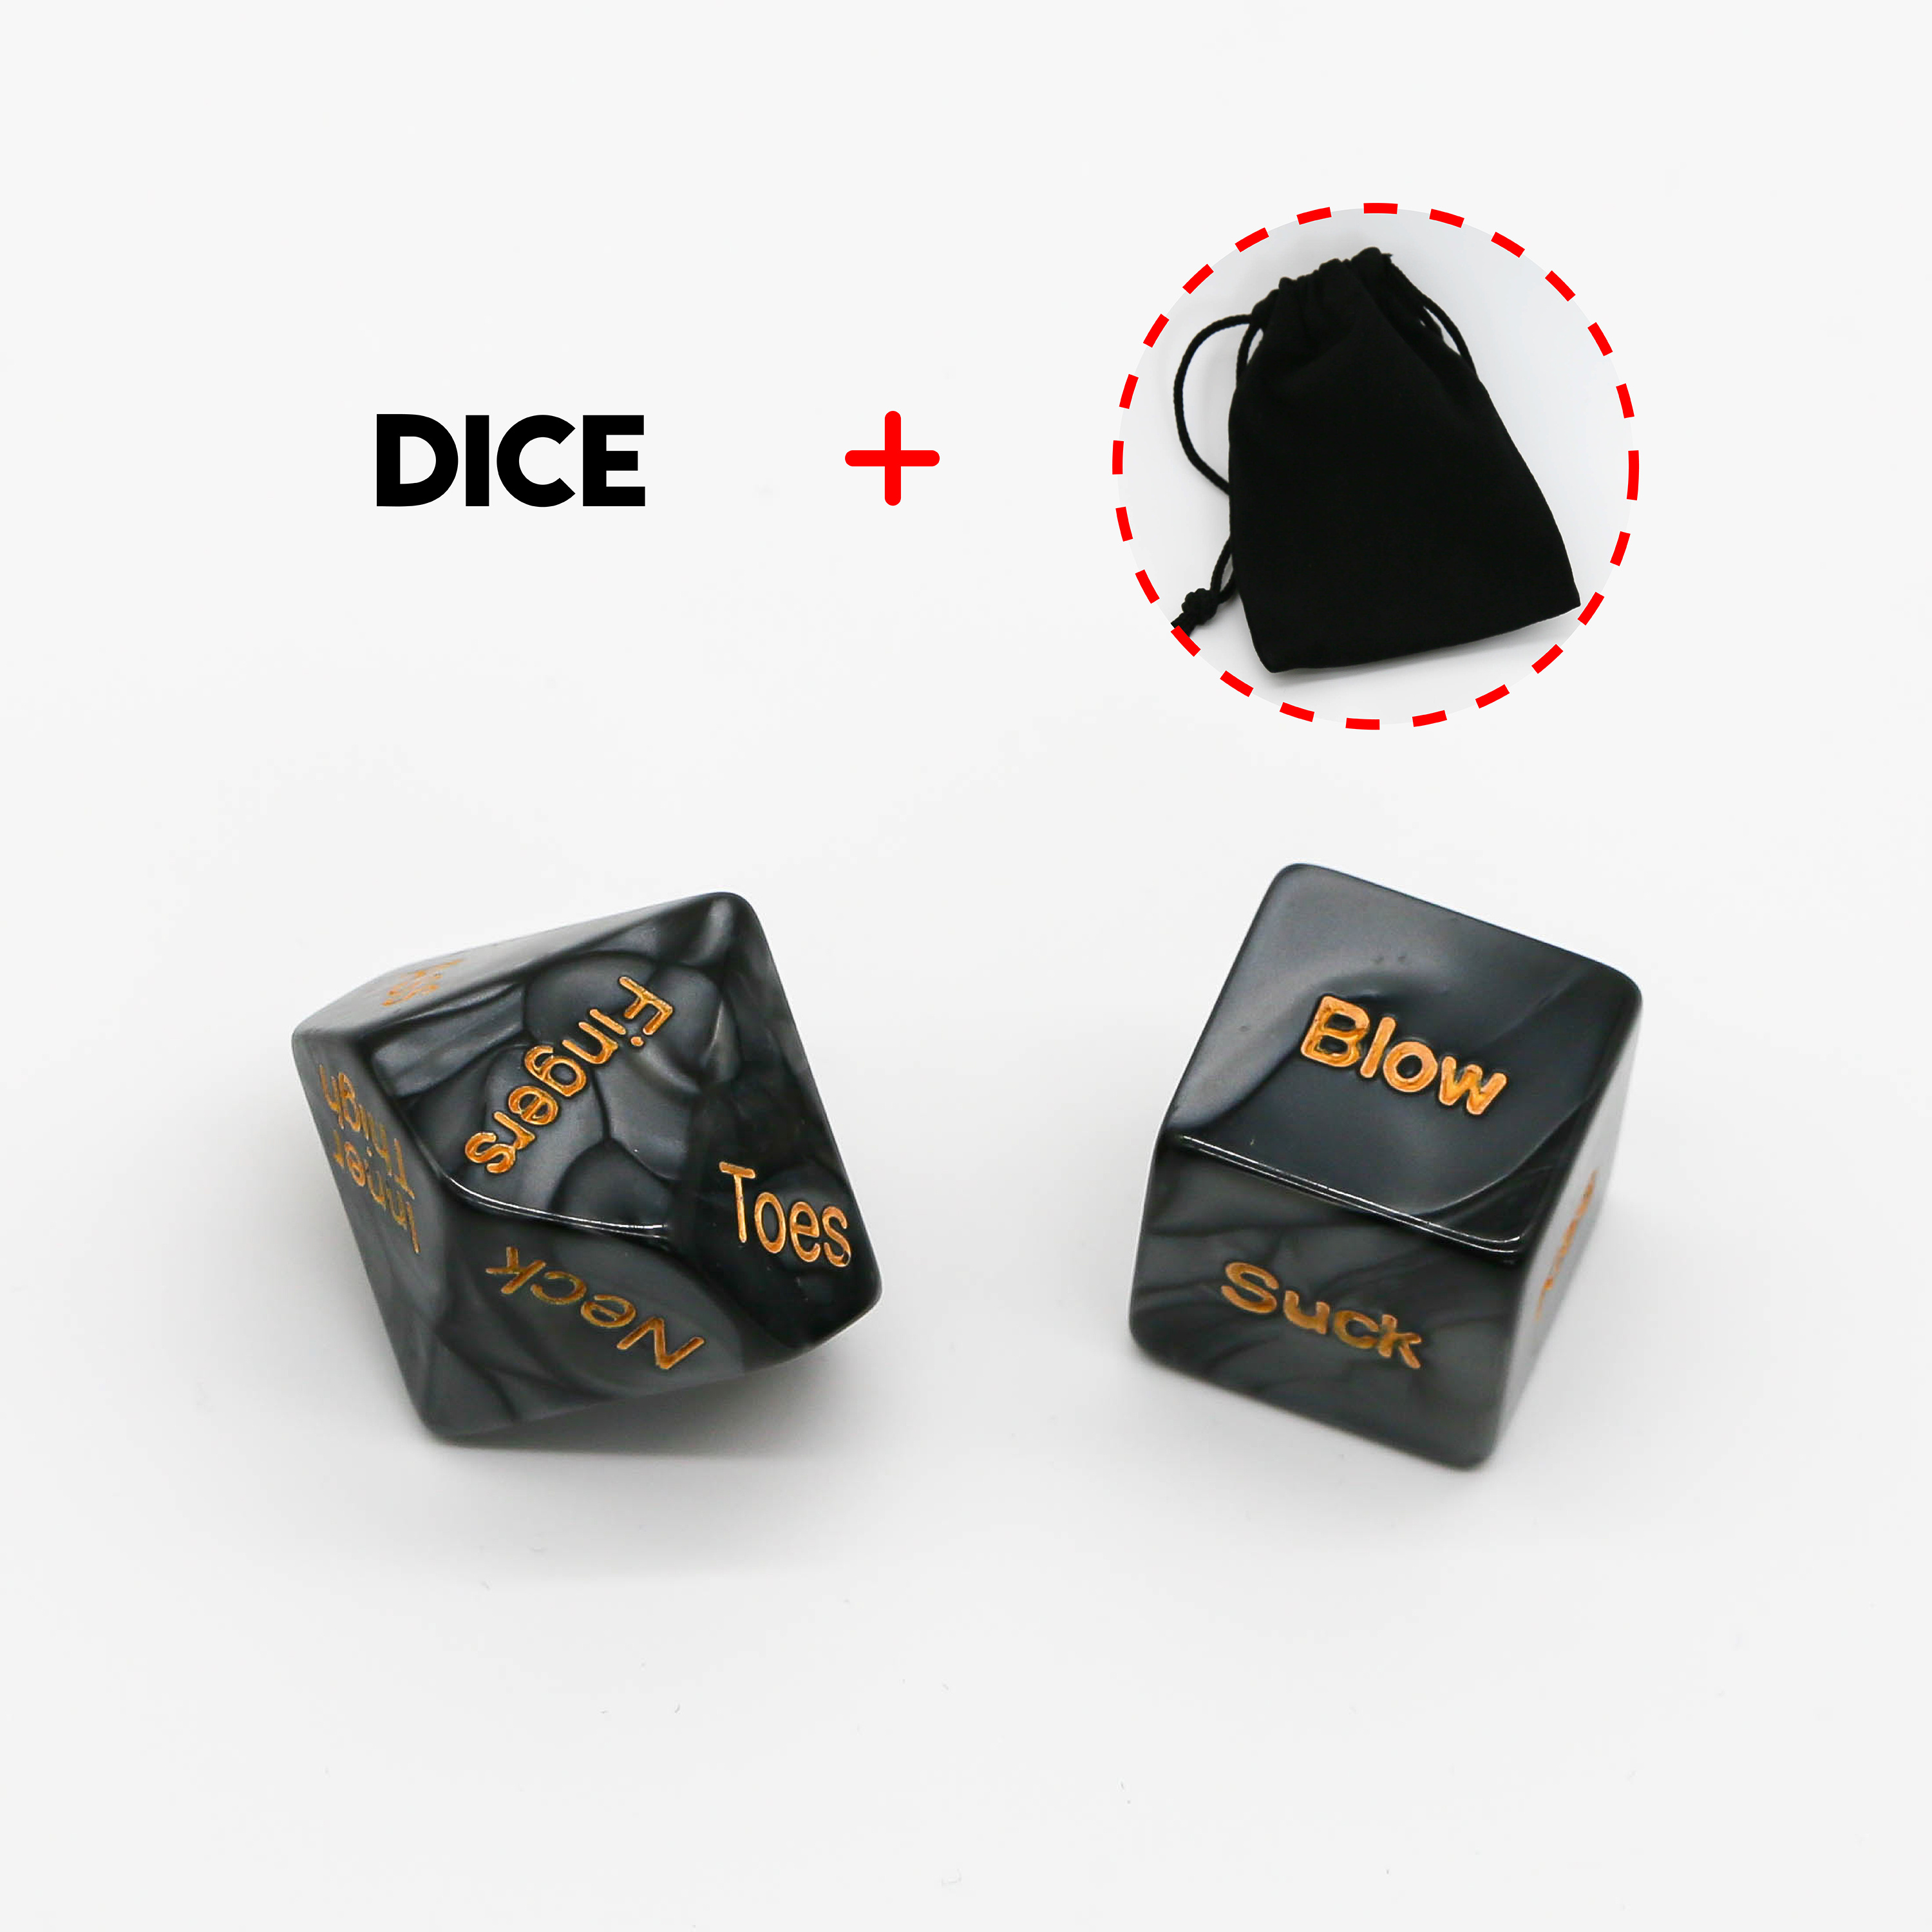 Sex Fun Dice With Bag Set Game Adult Novelty Party Favors For Adult Lovers And Couples, Romantic Erotic Dice Game Toys Valentines Day Make The Perfect Couples Toys Naughty Gift Honeymoon Bachelorette